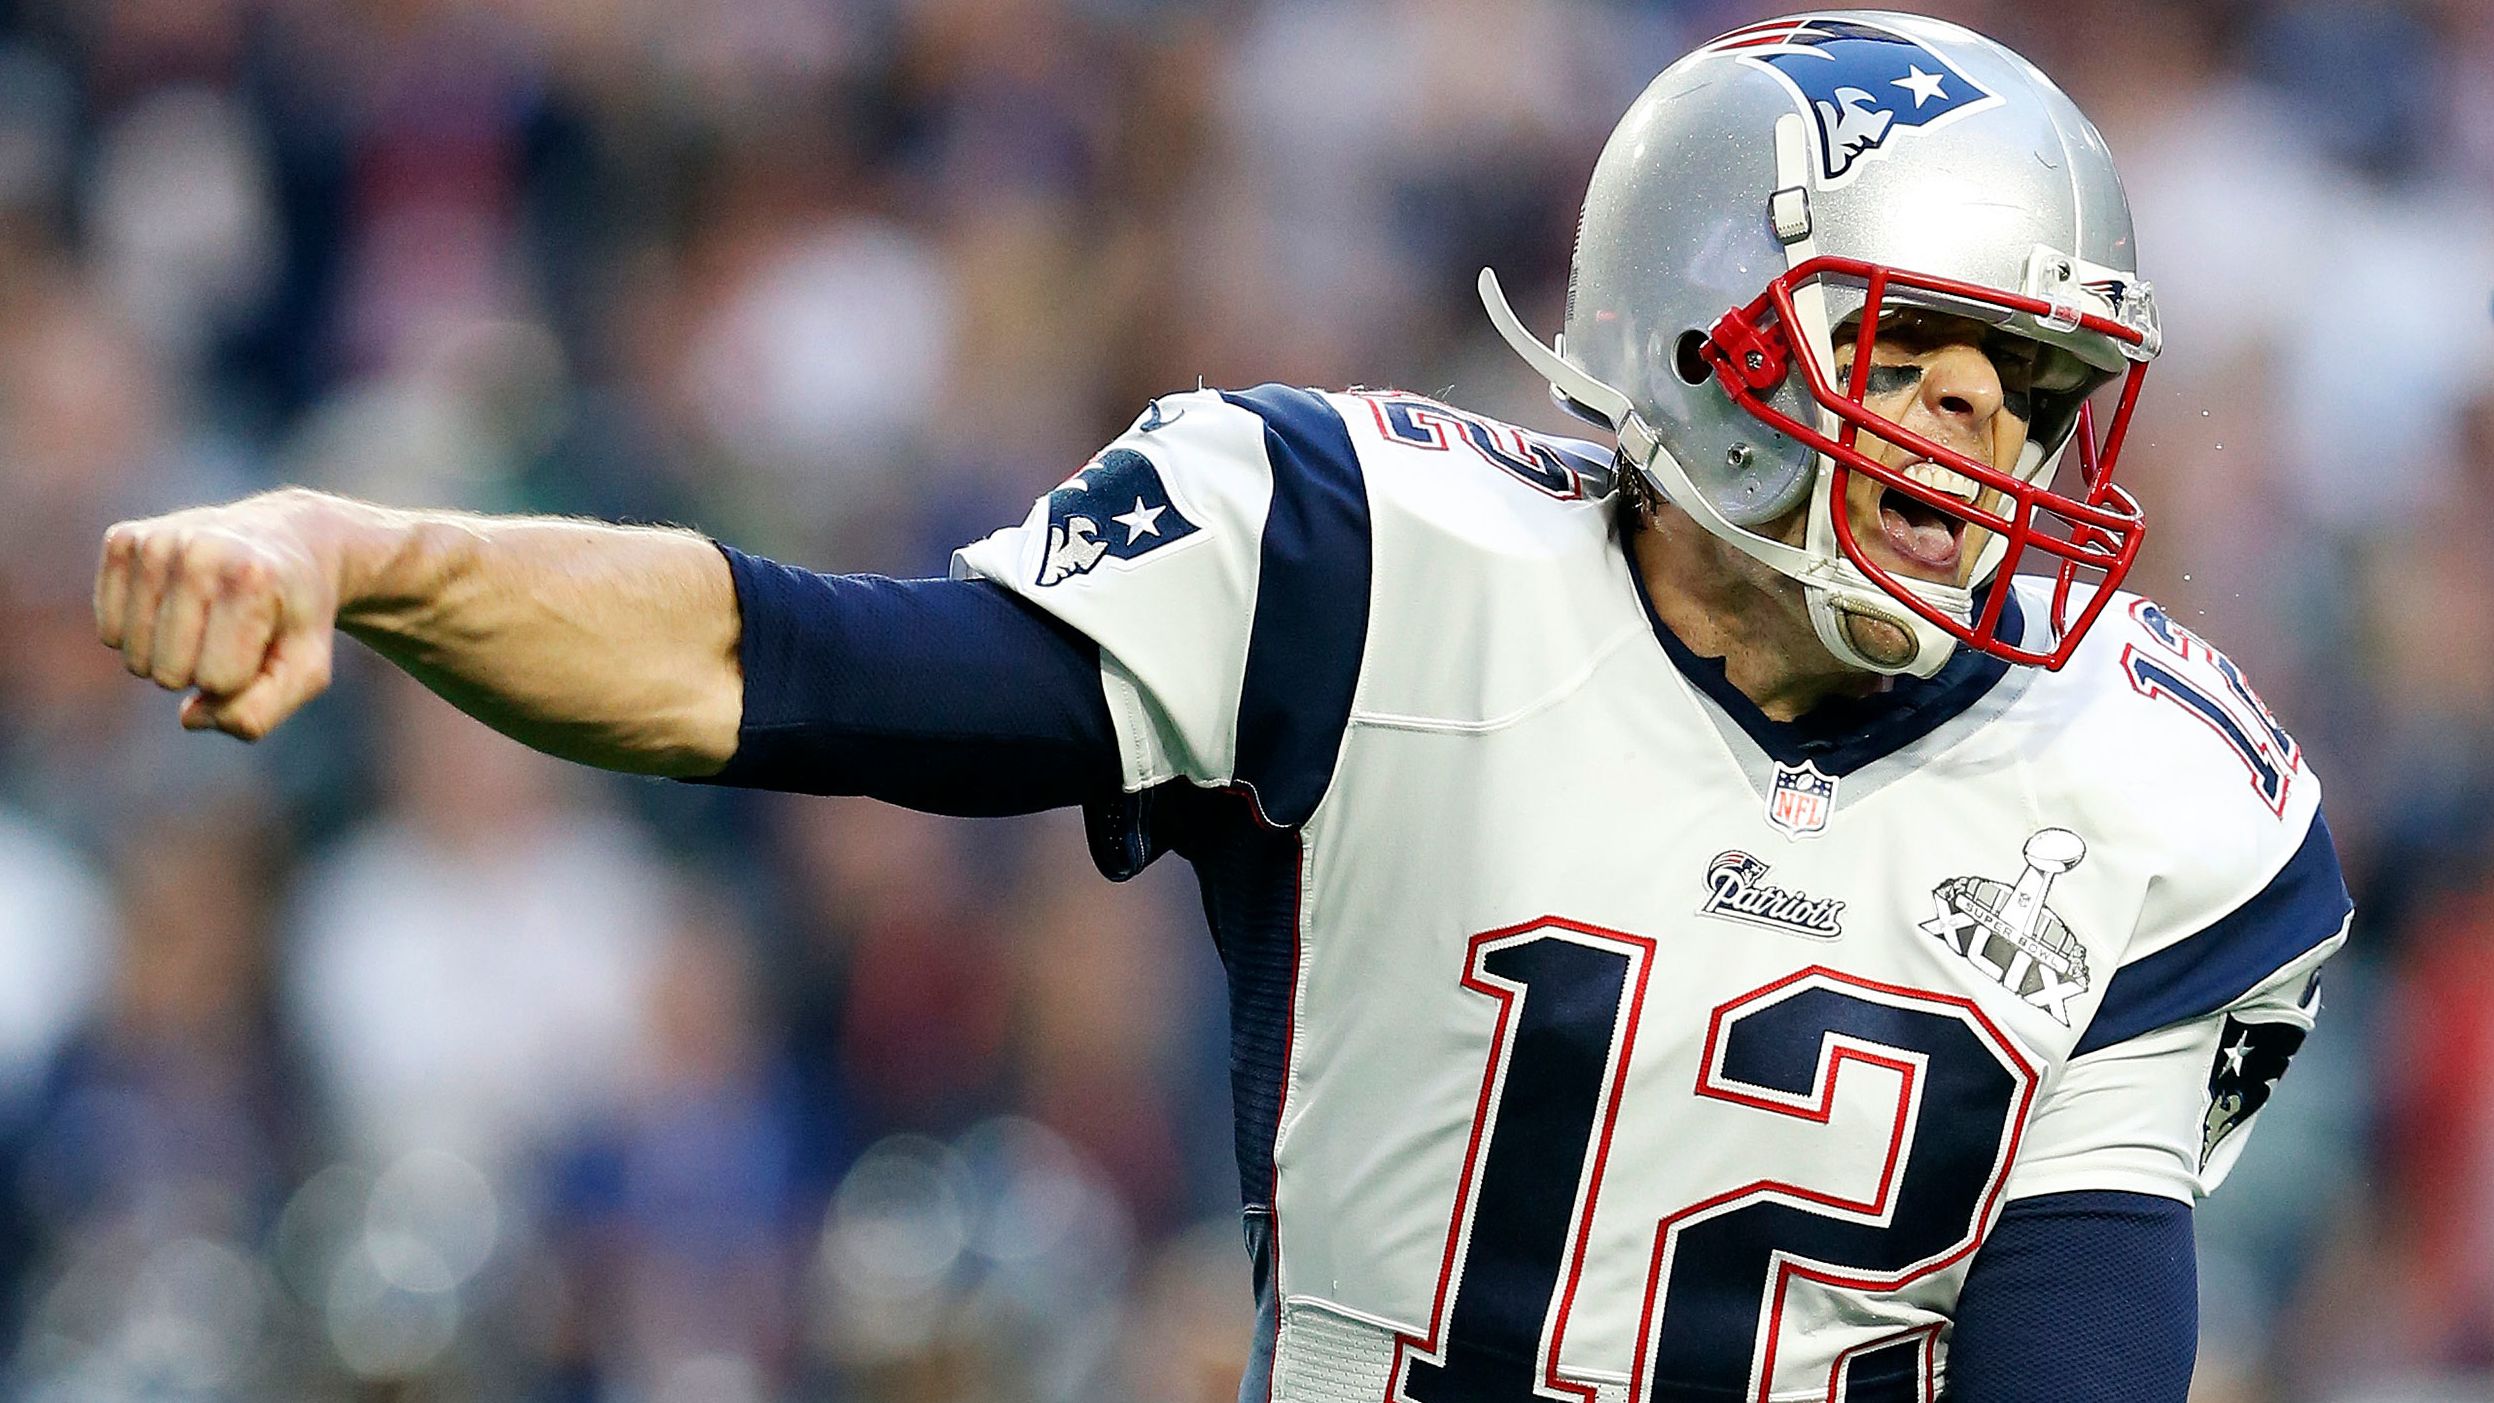 <strong>Super Bowl XLIX (2015):</strong> New England's Tom Brady pumps his fist after throwing one of his four touchdown passes in the Patriots' 28-24 victory over Seattle. Brady joined Joe Montana as the only players to win three Super Bowl MVPs.